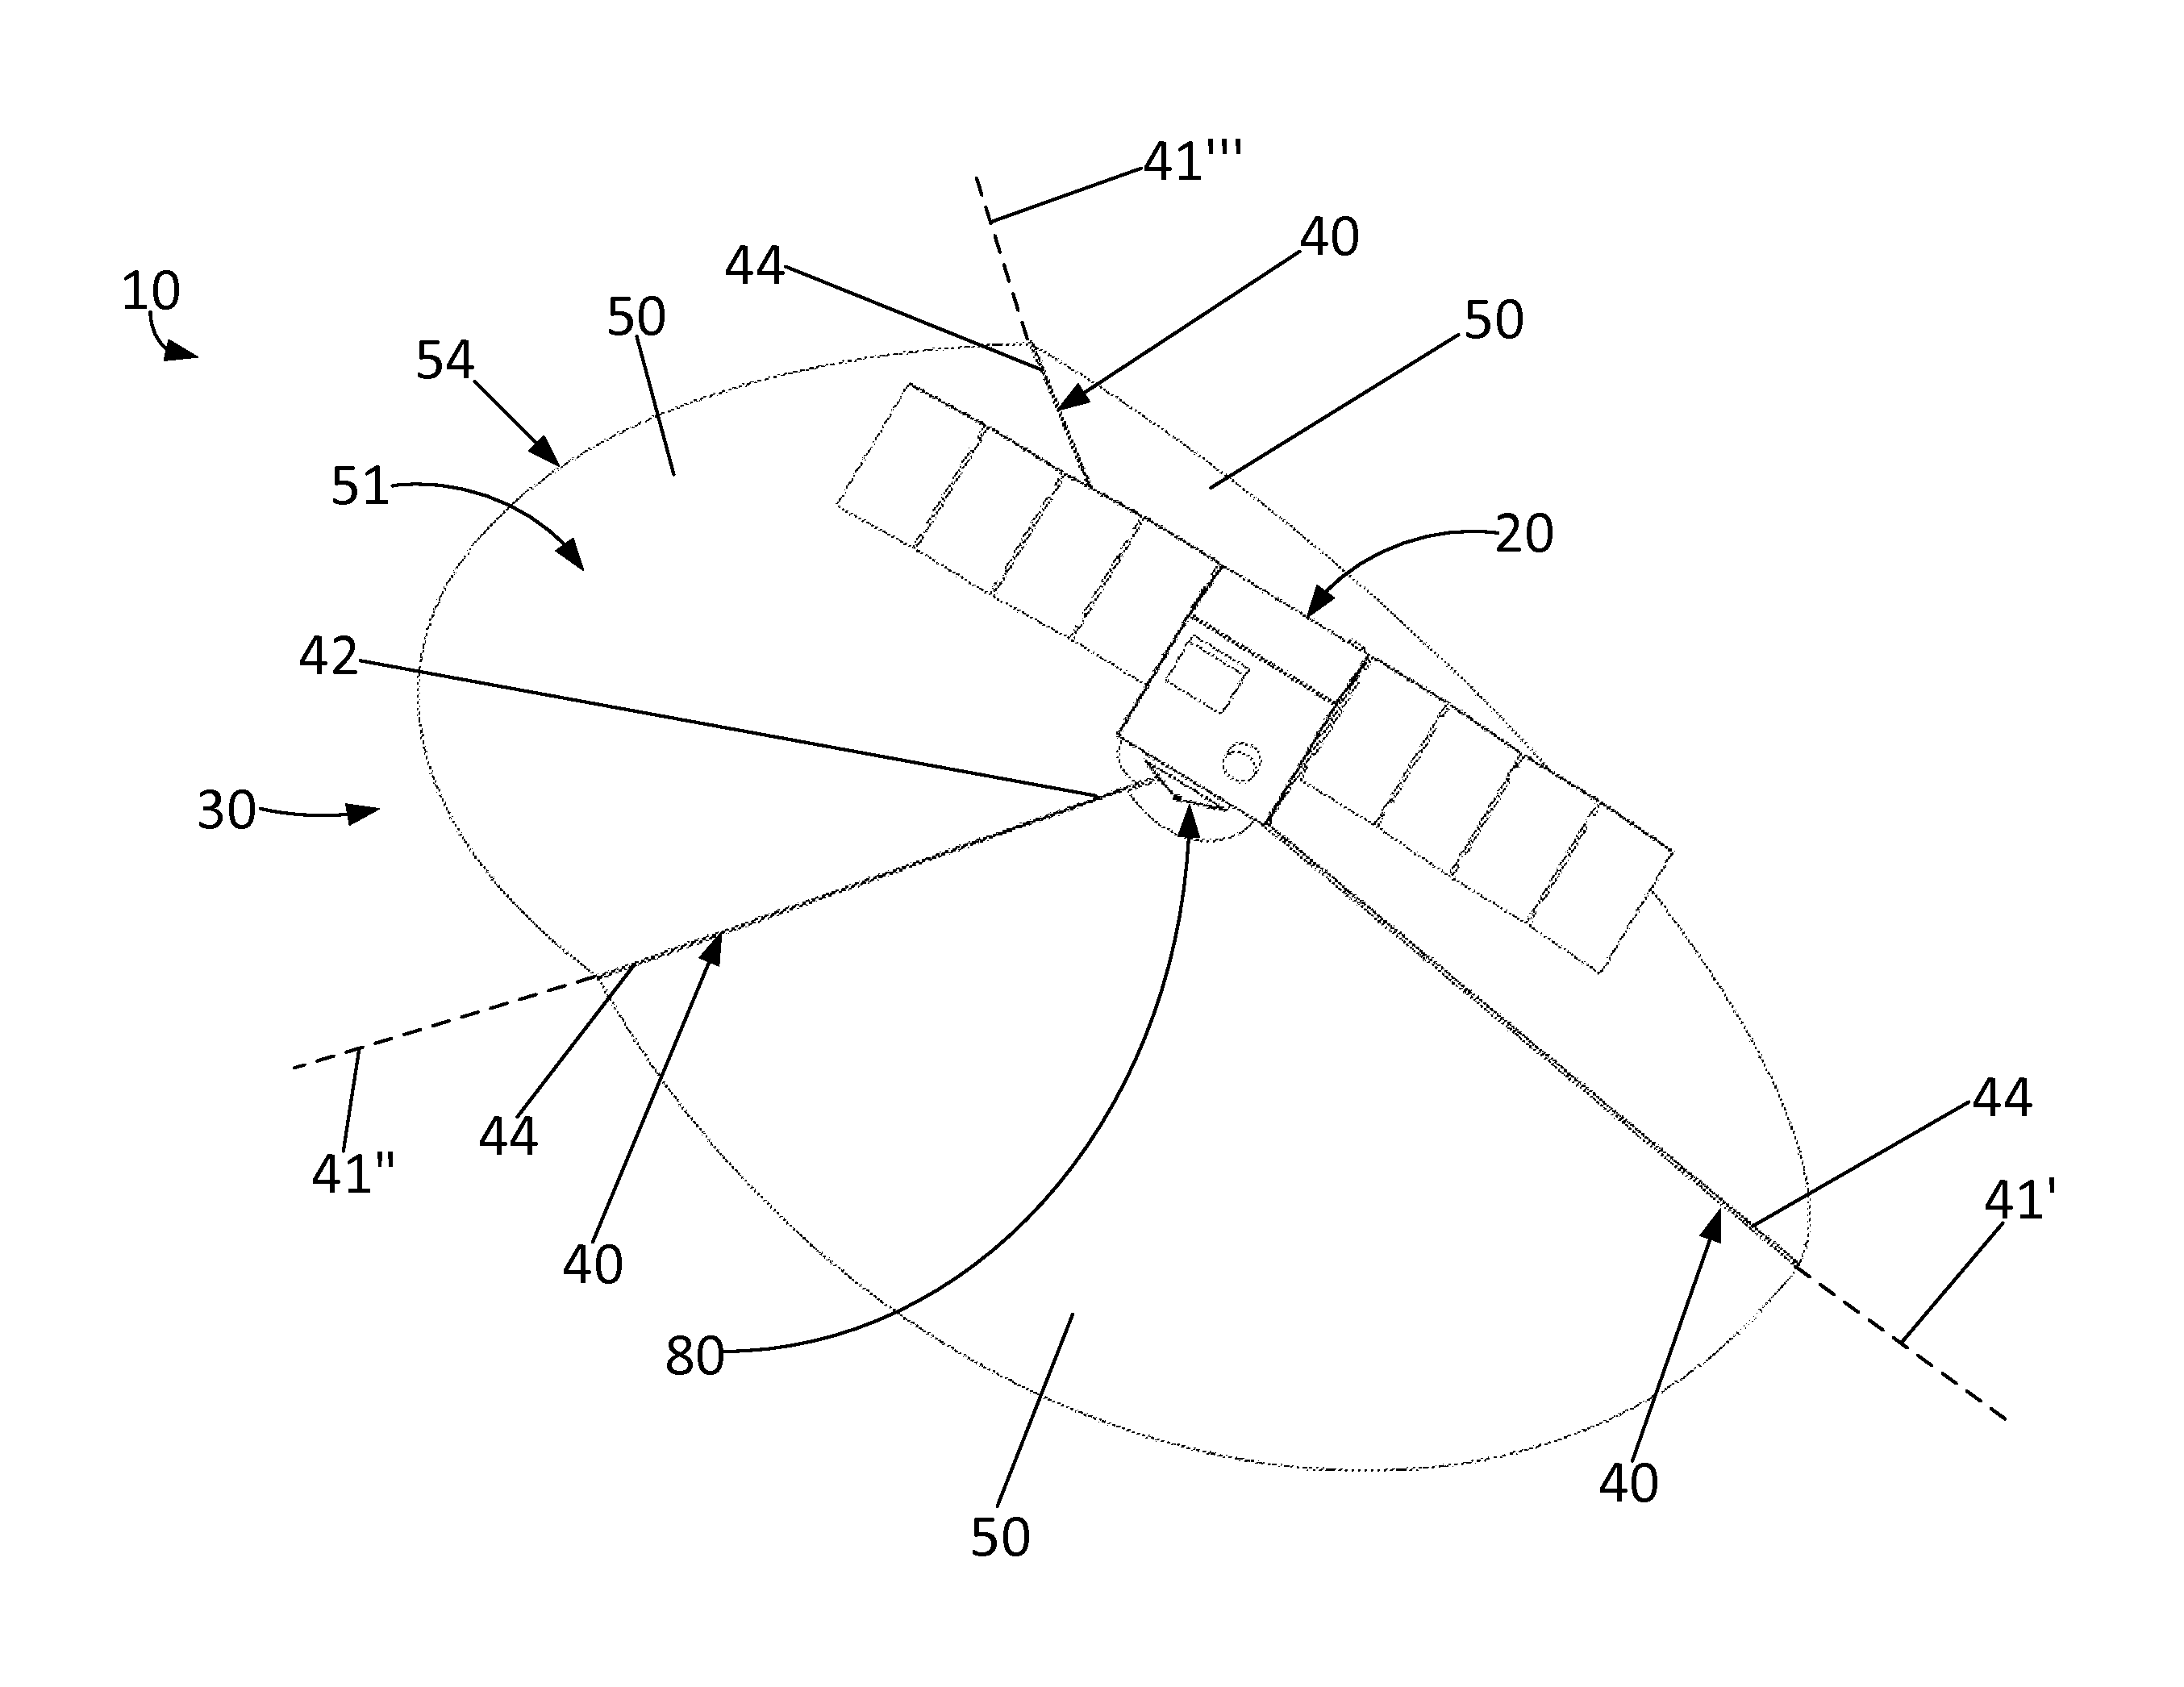 Gossamer apparatus and systems for use with spacecraft